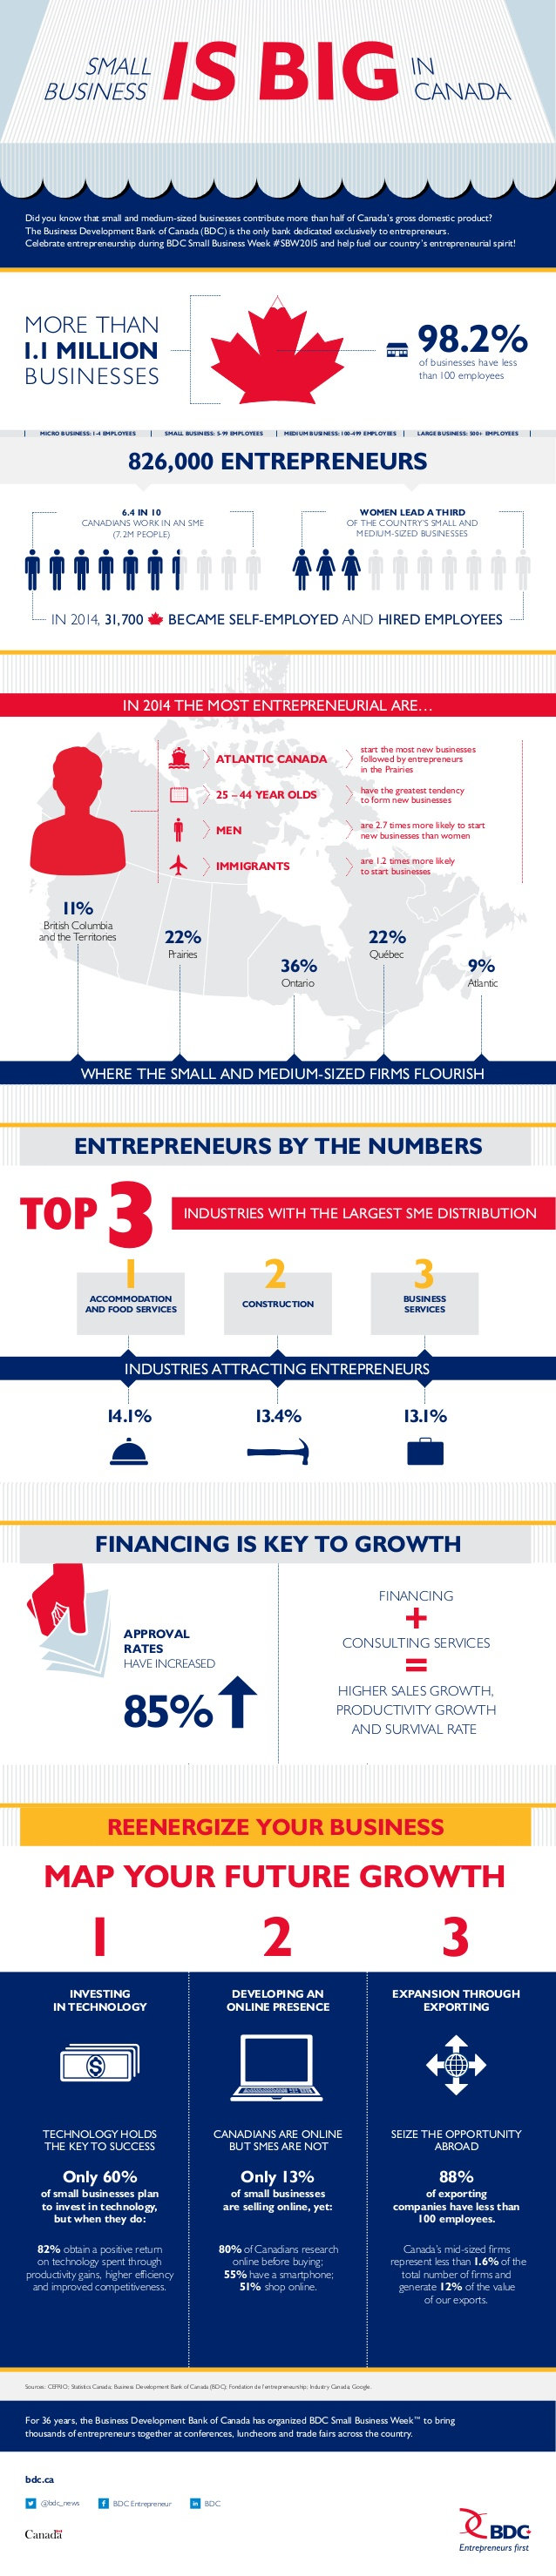 Small business is big in Canada - infographic